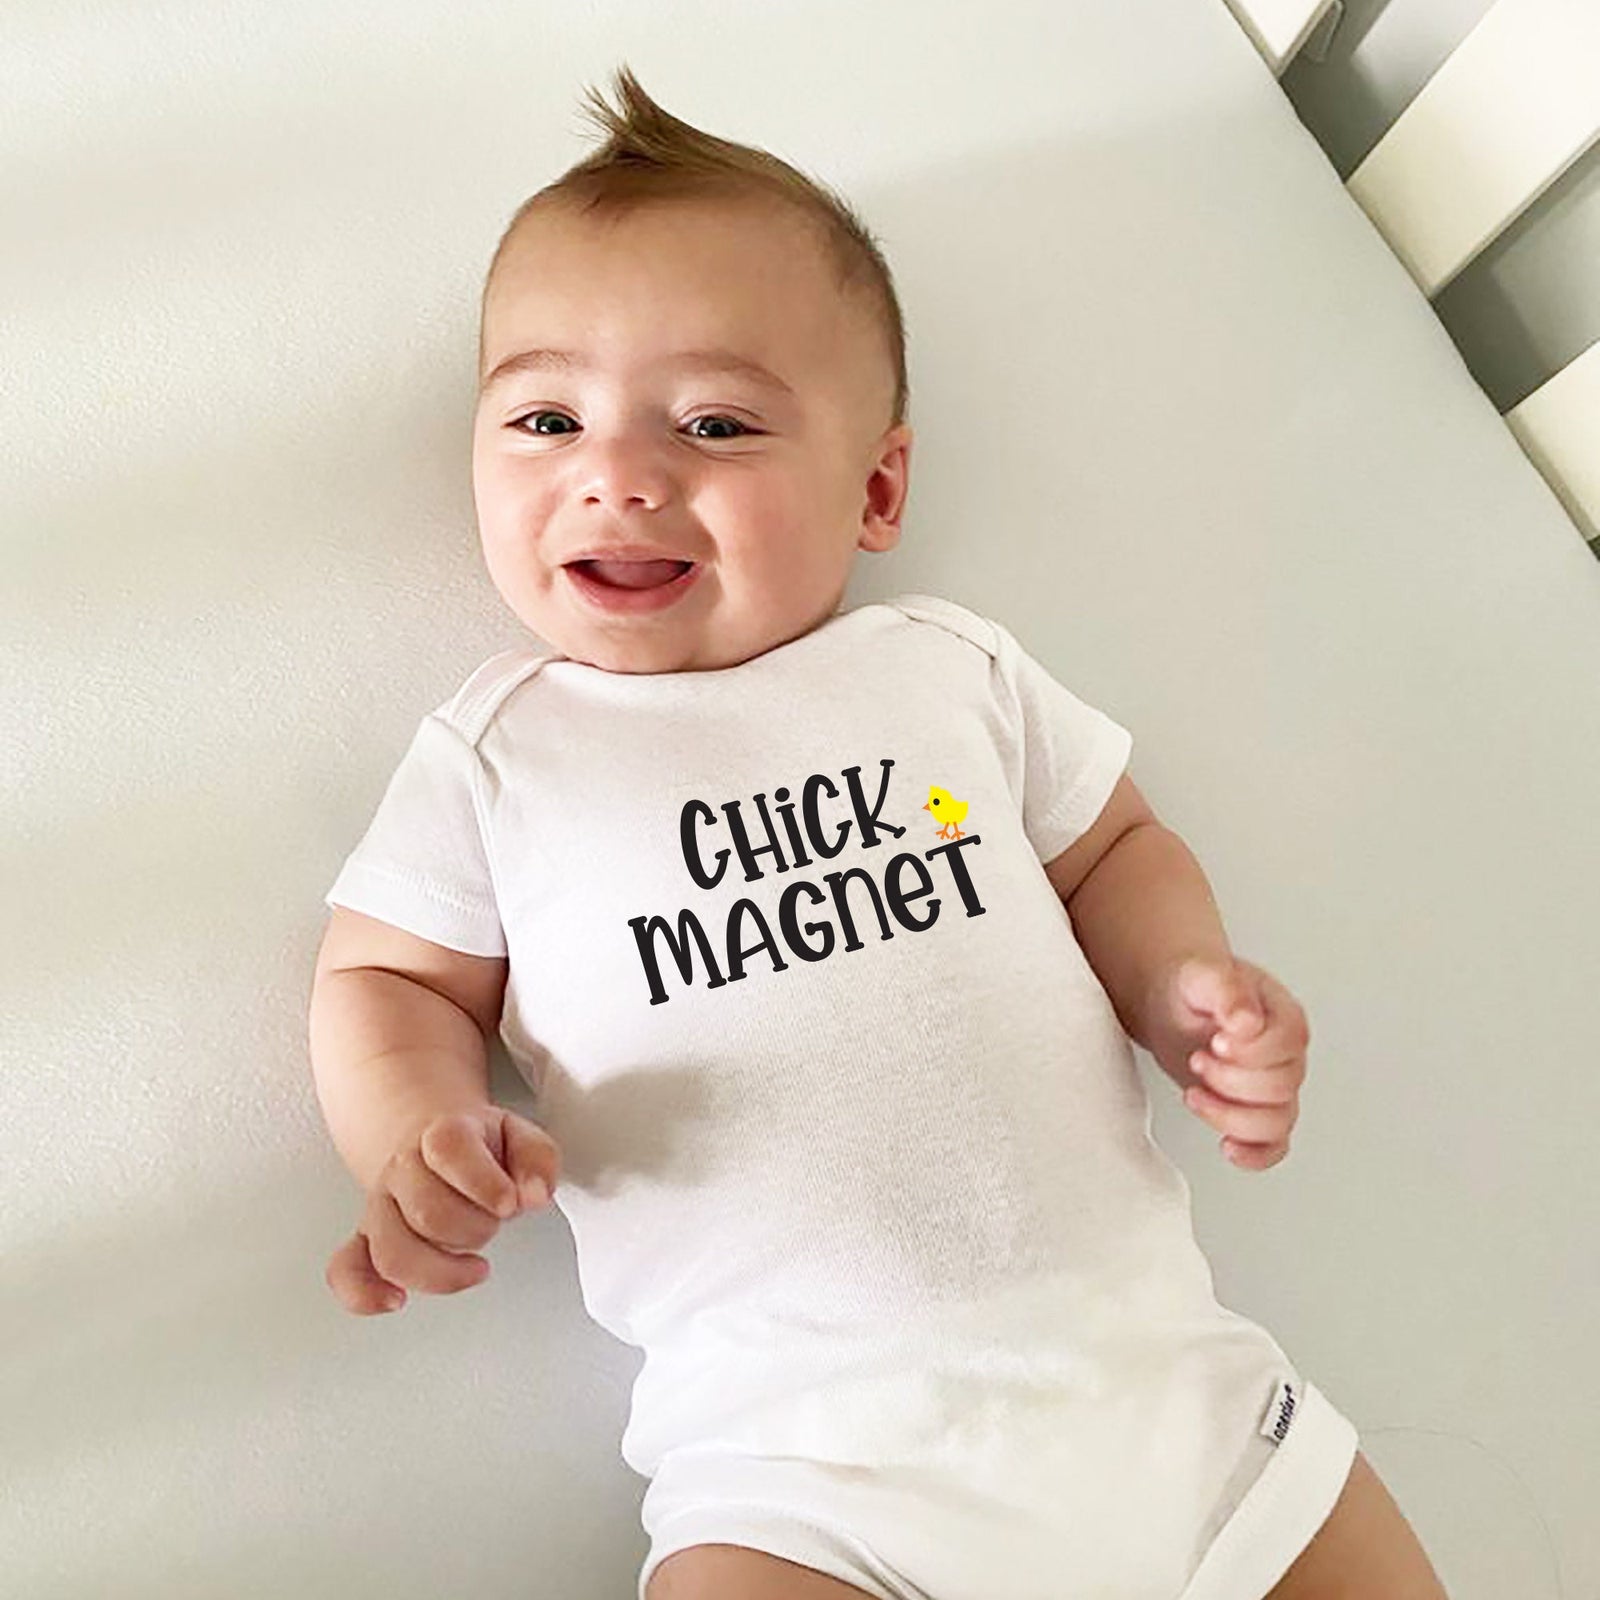 Chick Magnet Onesie - Cute Baby Onesie - Easter Shirt for Infants